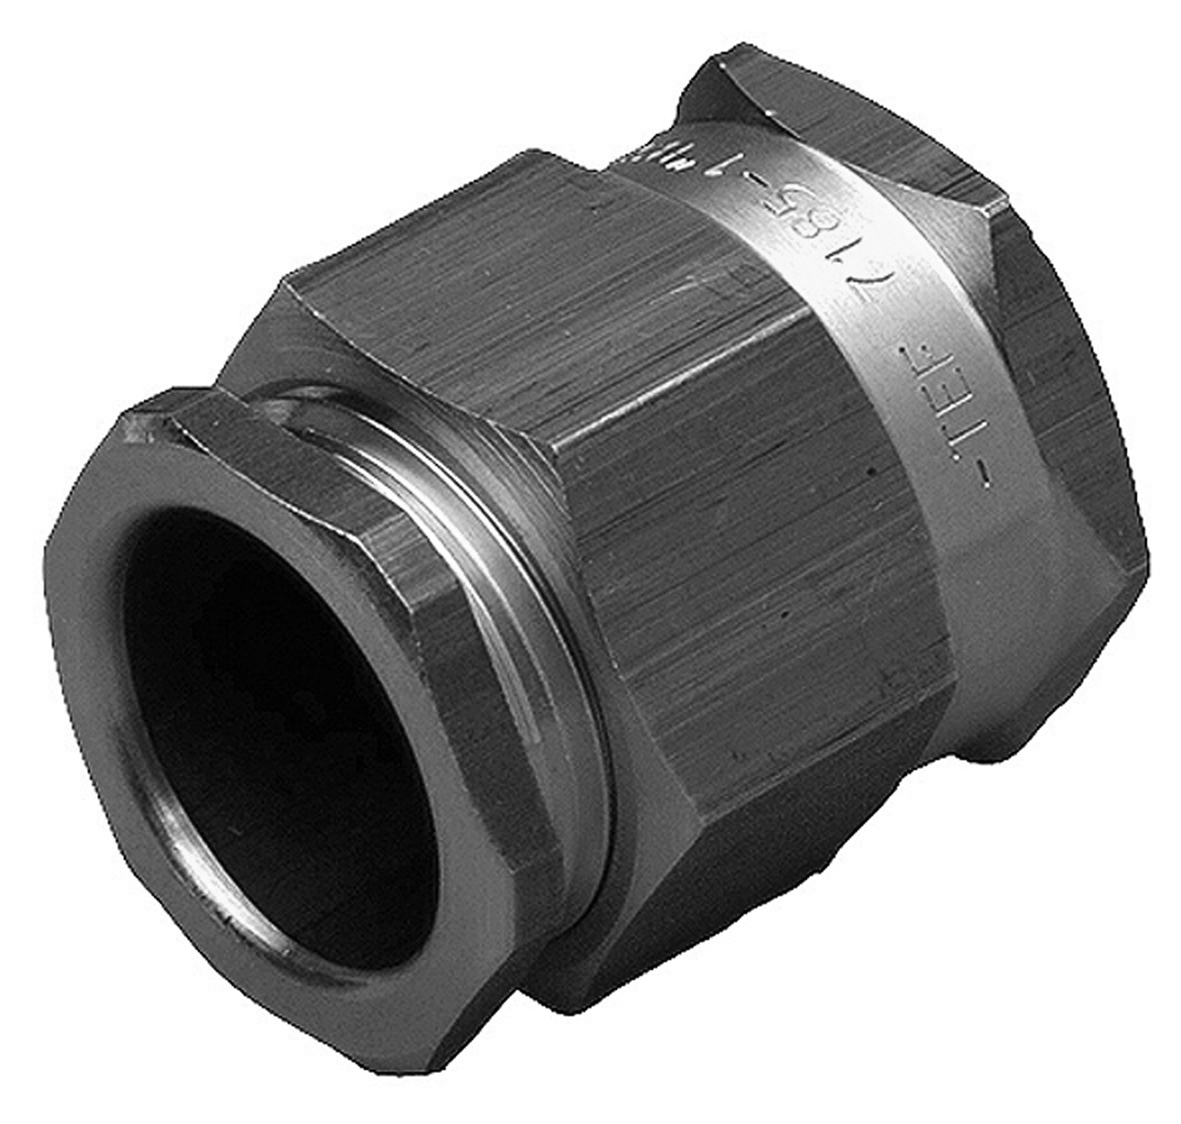 TEF 7185 Pipe Ending Gland: 1